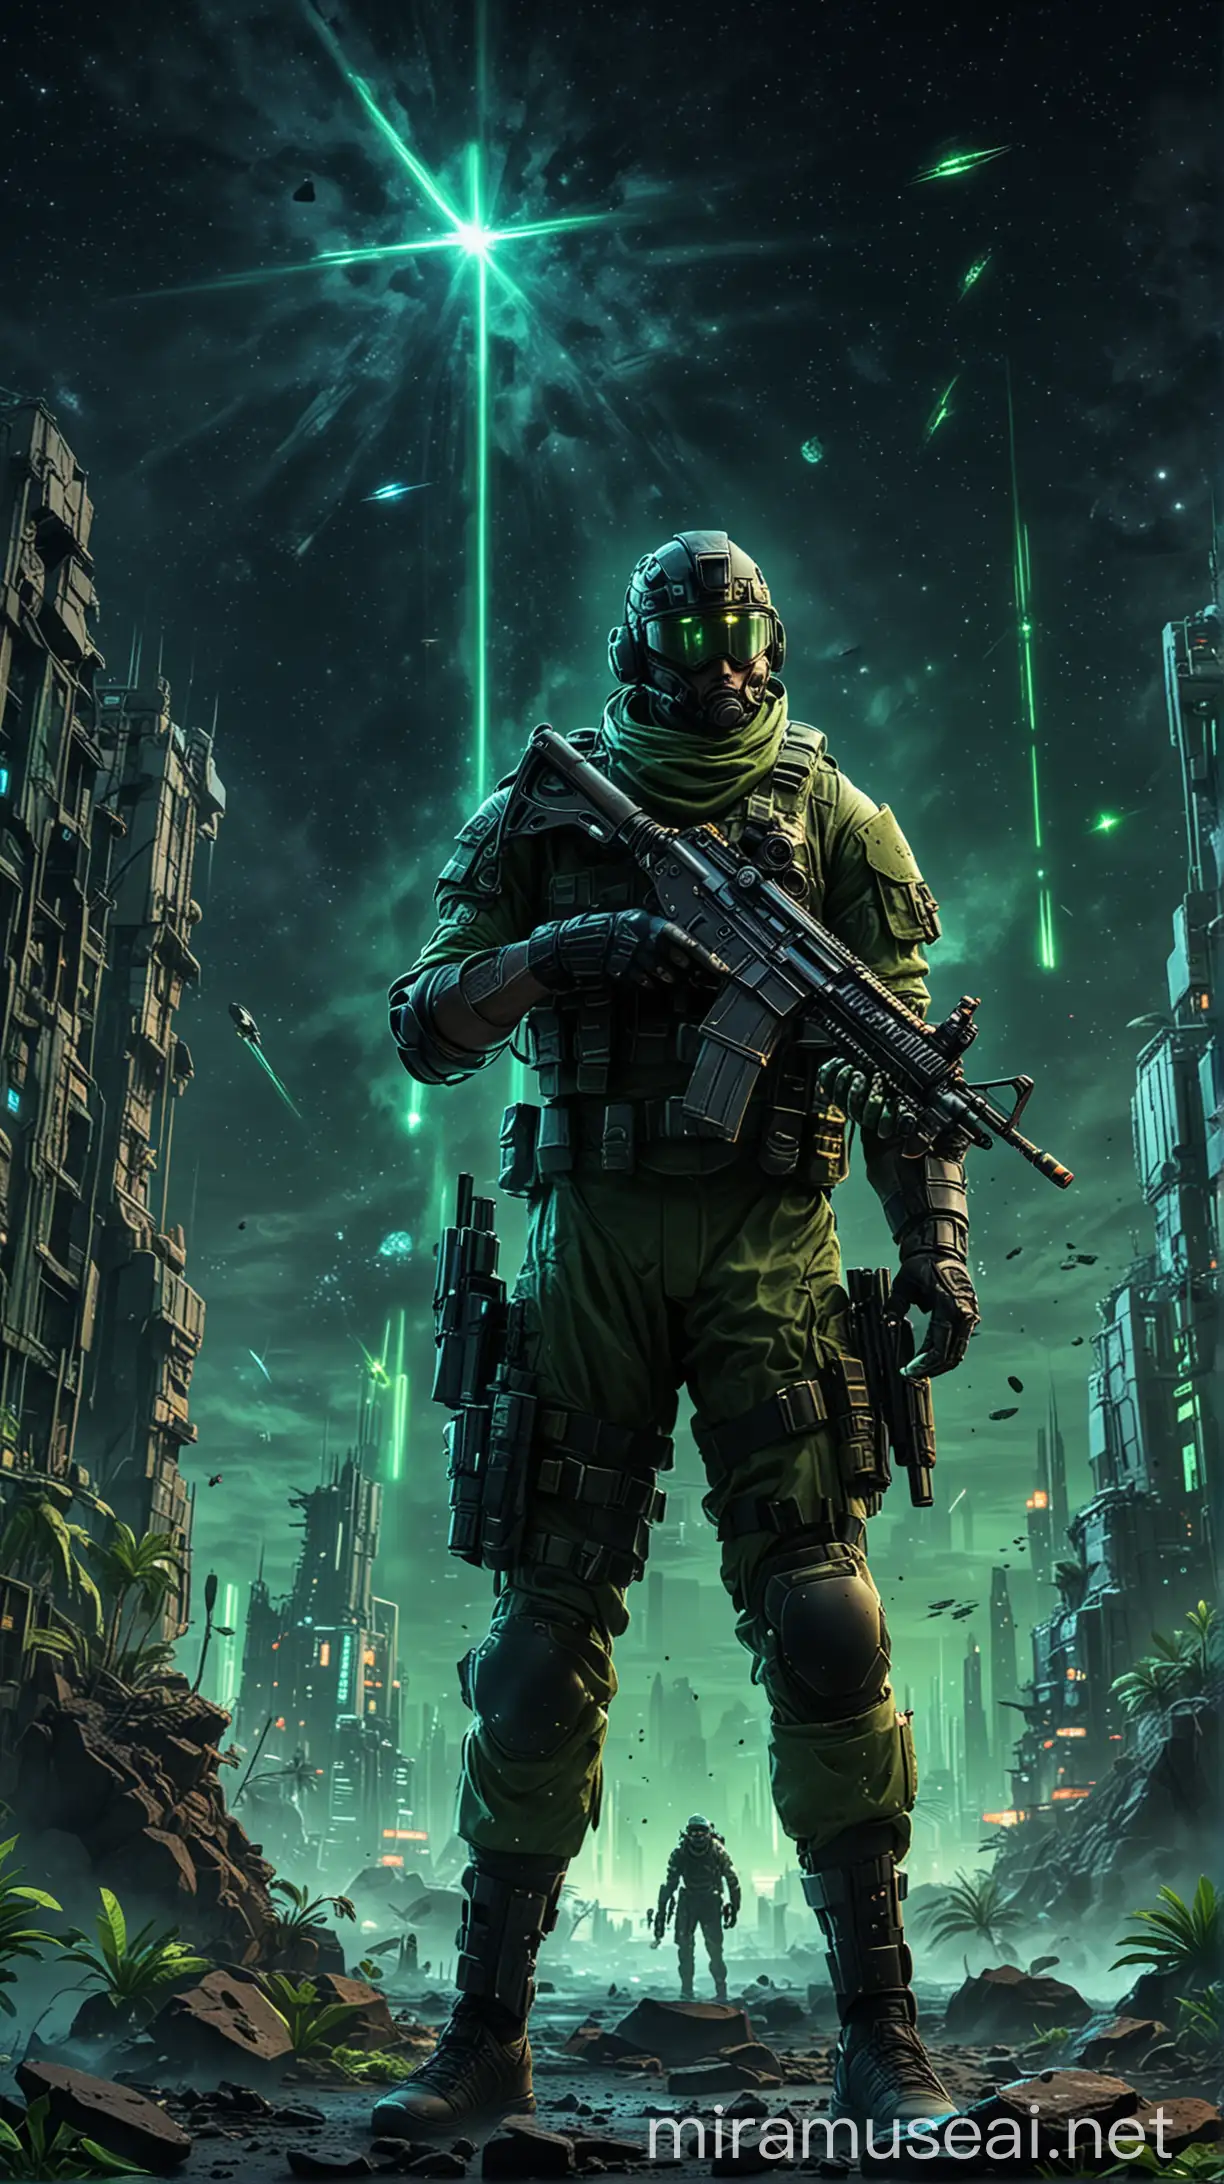 banner for shooter game "shrapnel", time is night, in sky stars and 3 green neon meteors, futuristic city, soldier have green small stone in palm